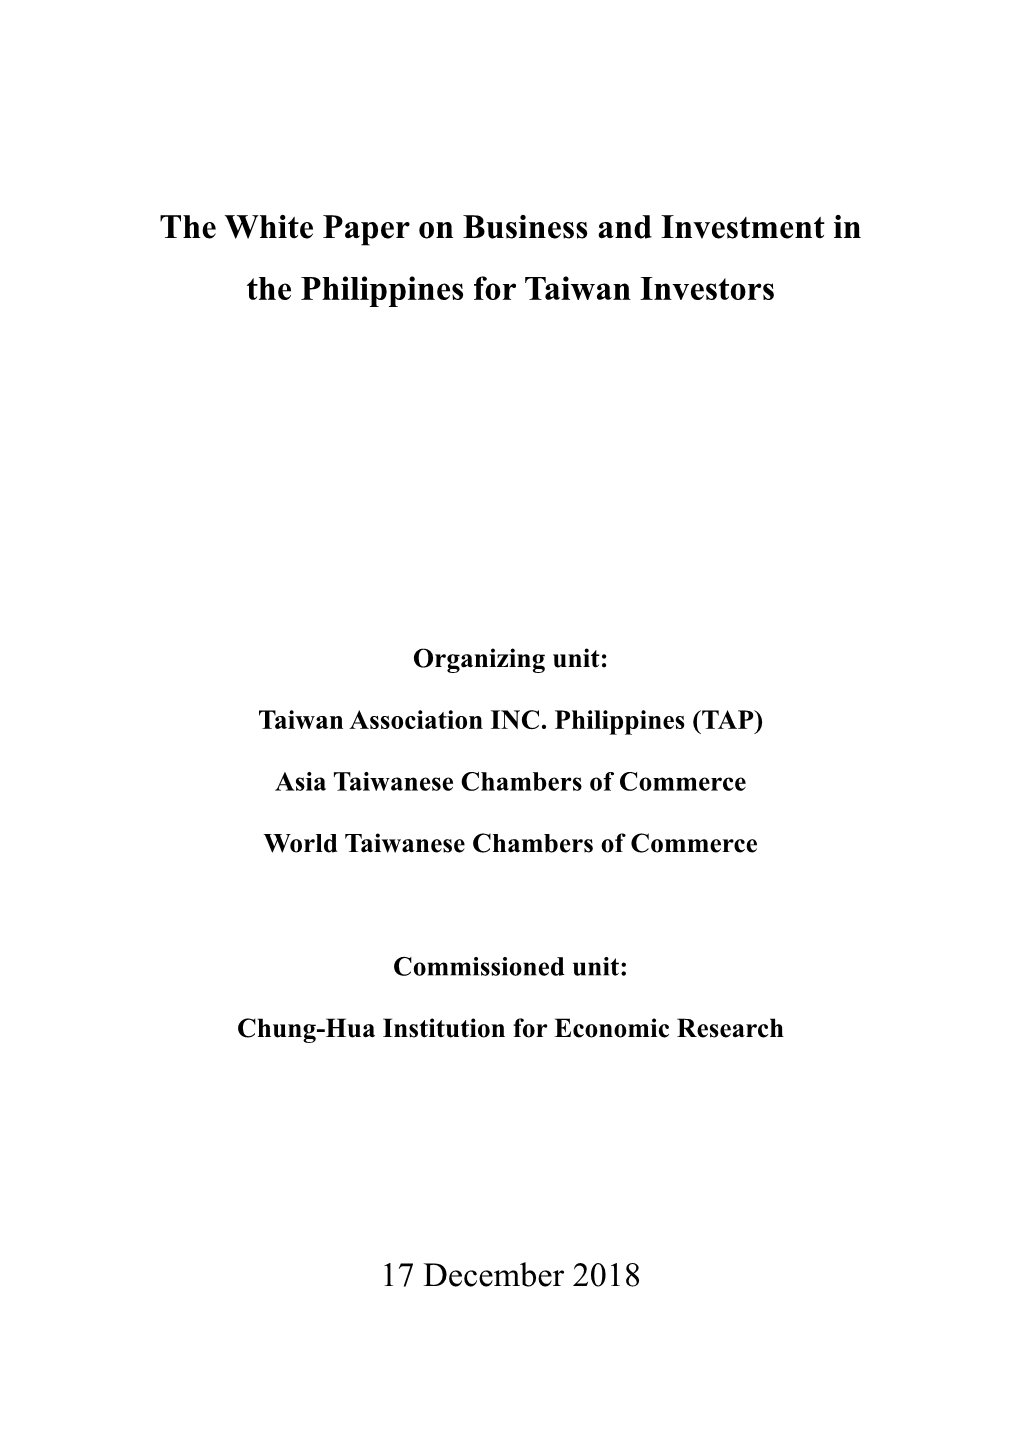 The White Paper on Business and Investment in the Philippines for Taiwan Investors